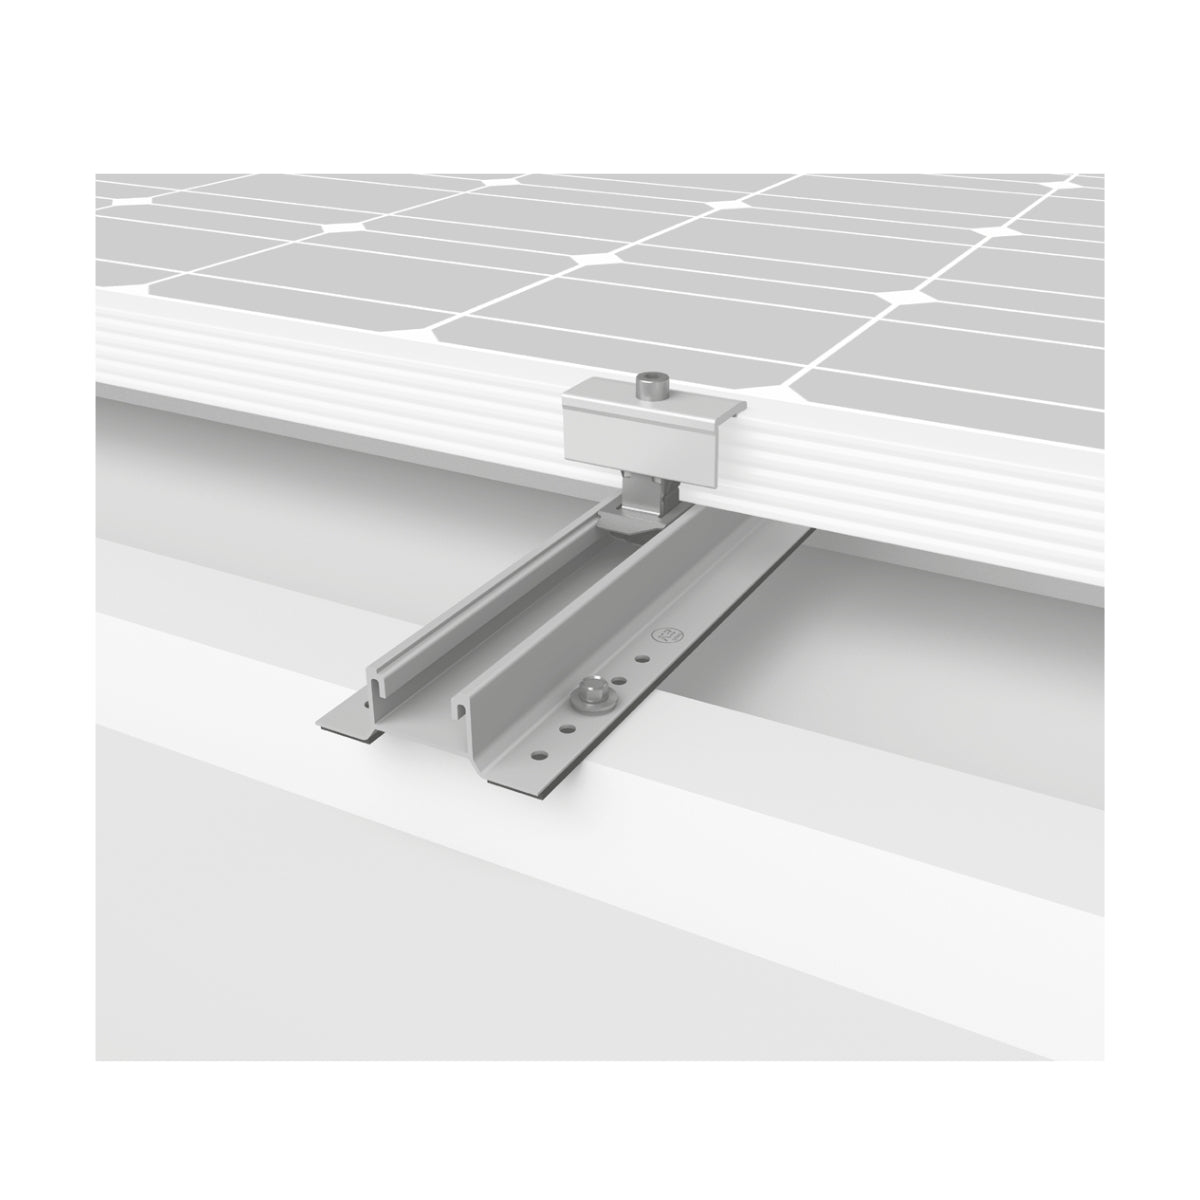 K2-Systems IBR Roof MiniRail MK2 2 Panel Roof Mounting System